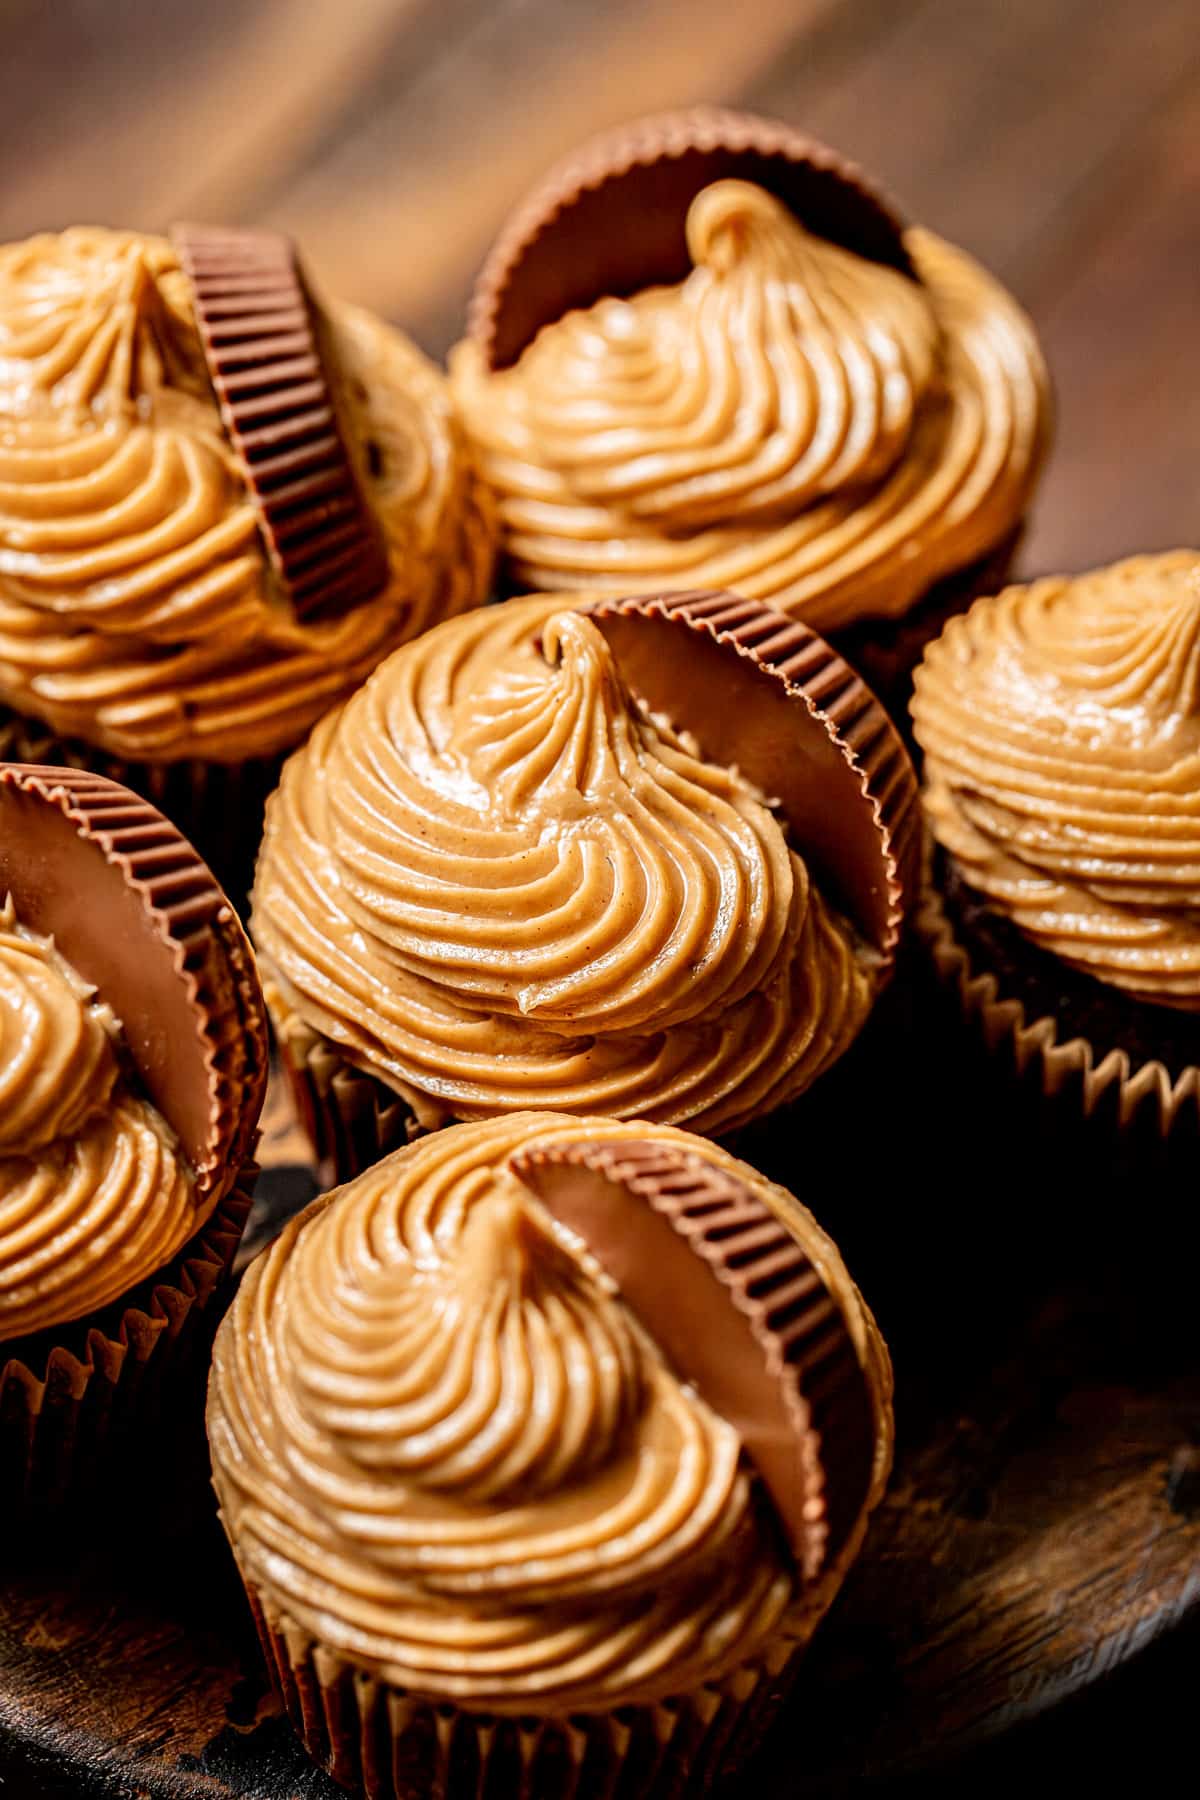 chocolate peanut butter cup cupcakes on wooden surface.